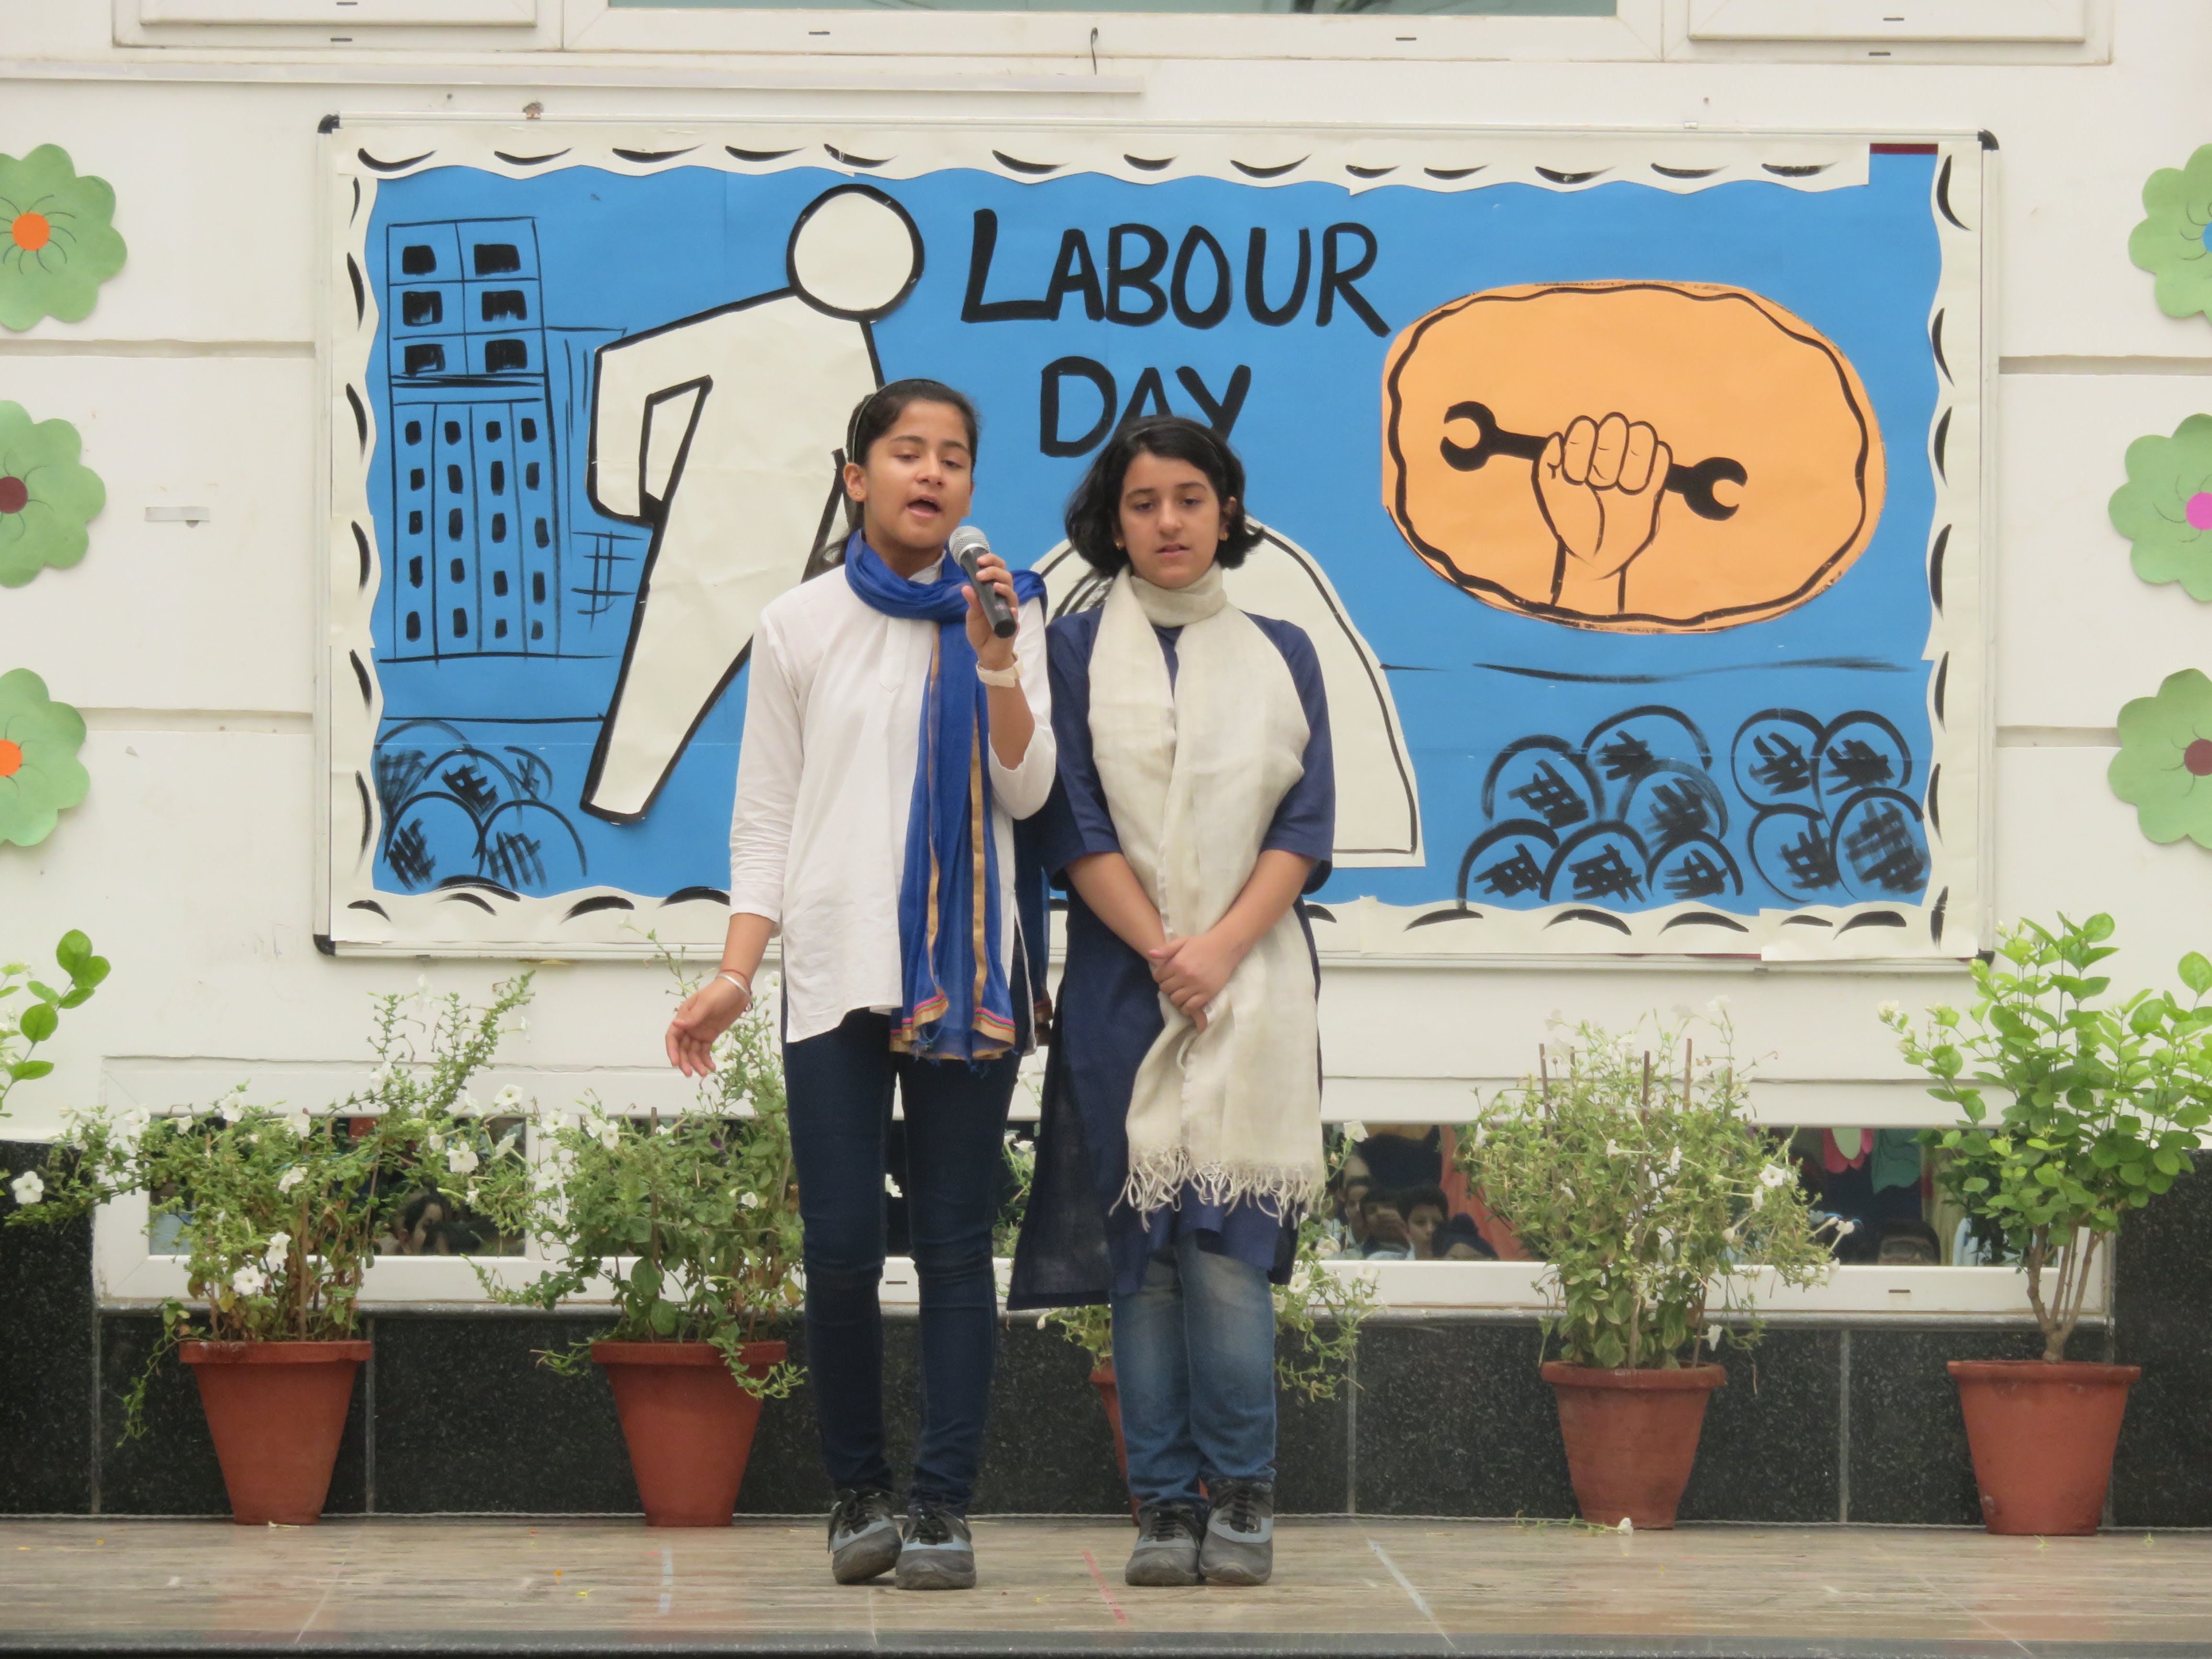 Special Assembly on Labour Day